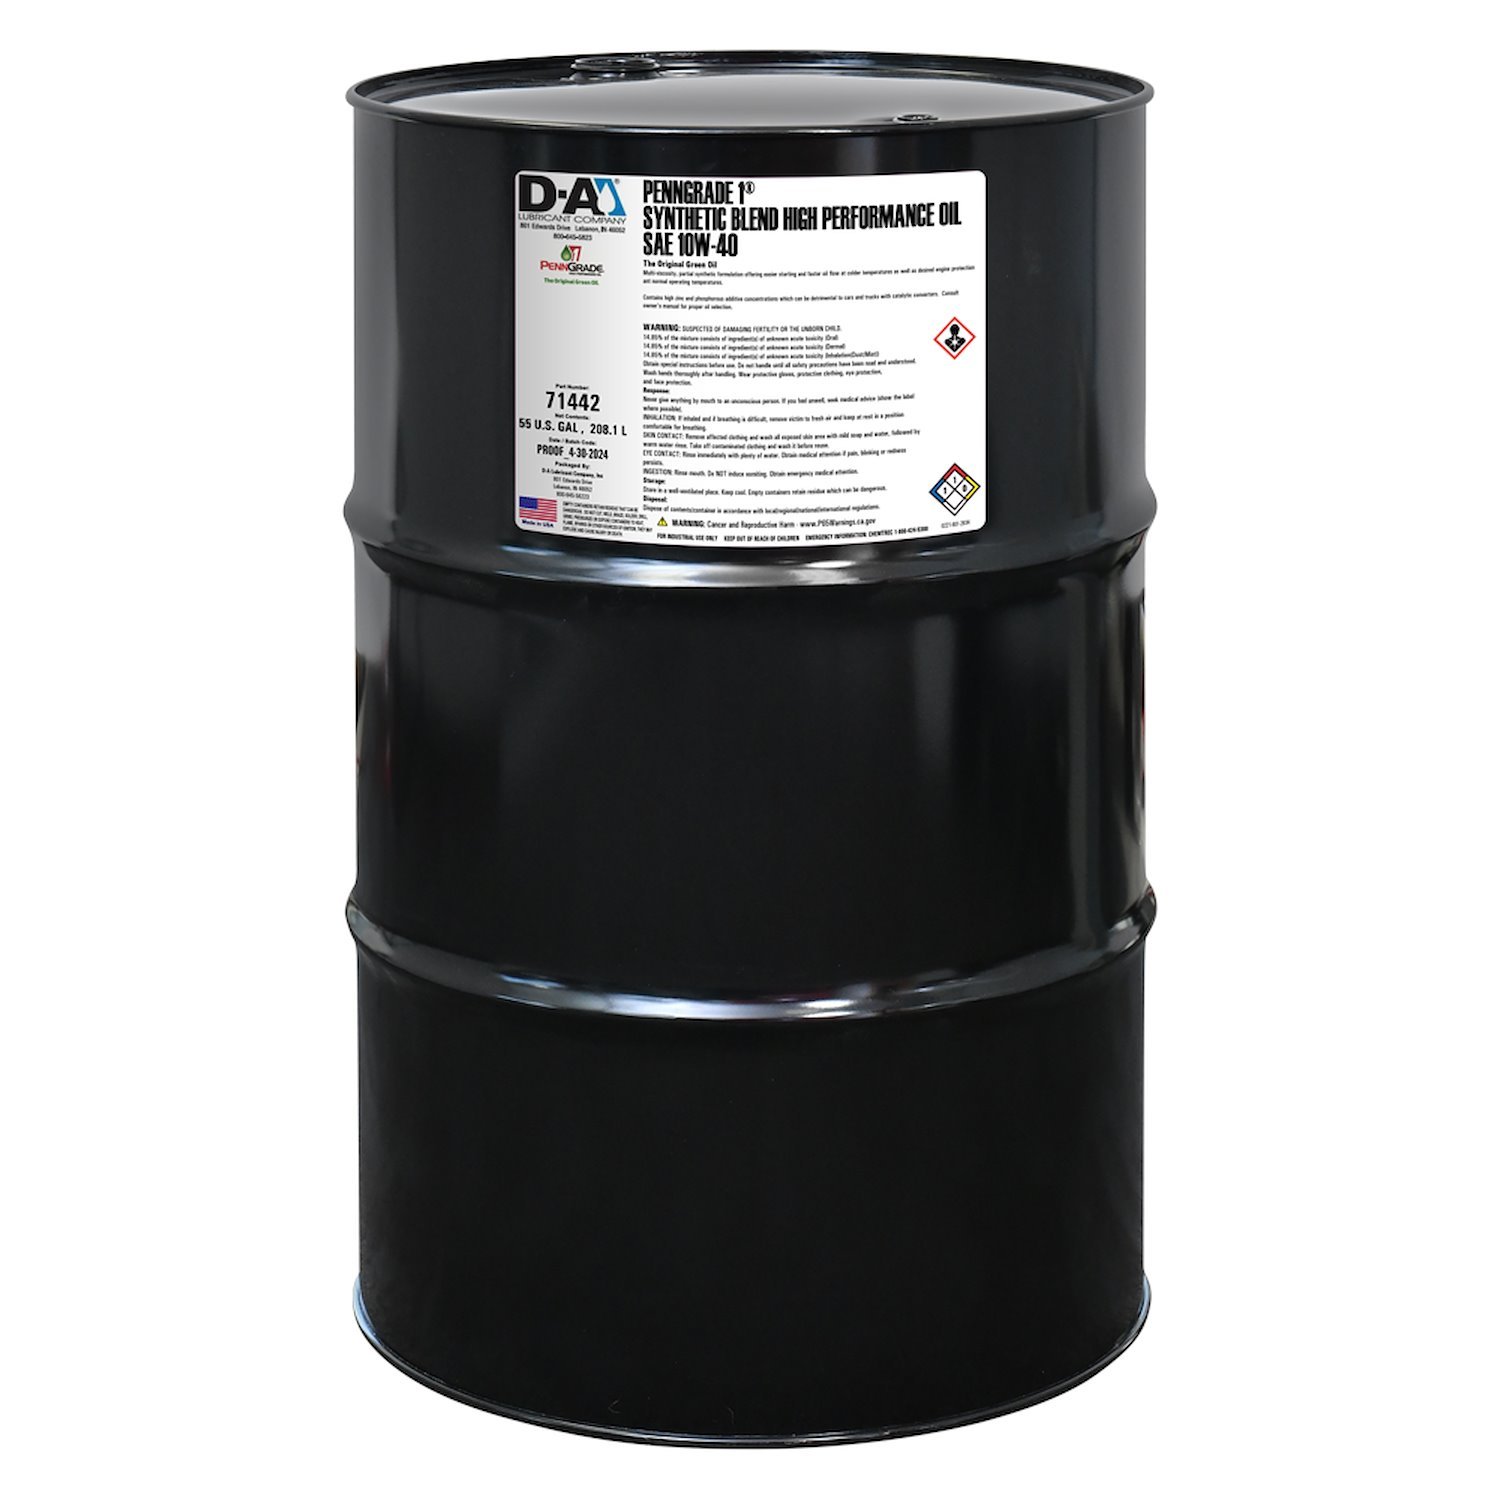 71442 Synthetic Blend High Performance Motor Oil SAE 10W-40 - 55 Gallon Drum